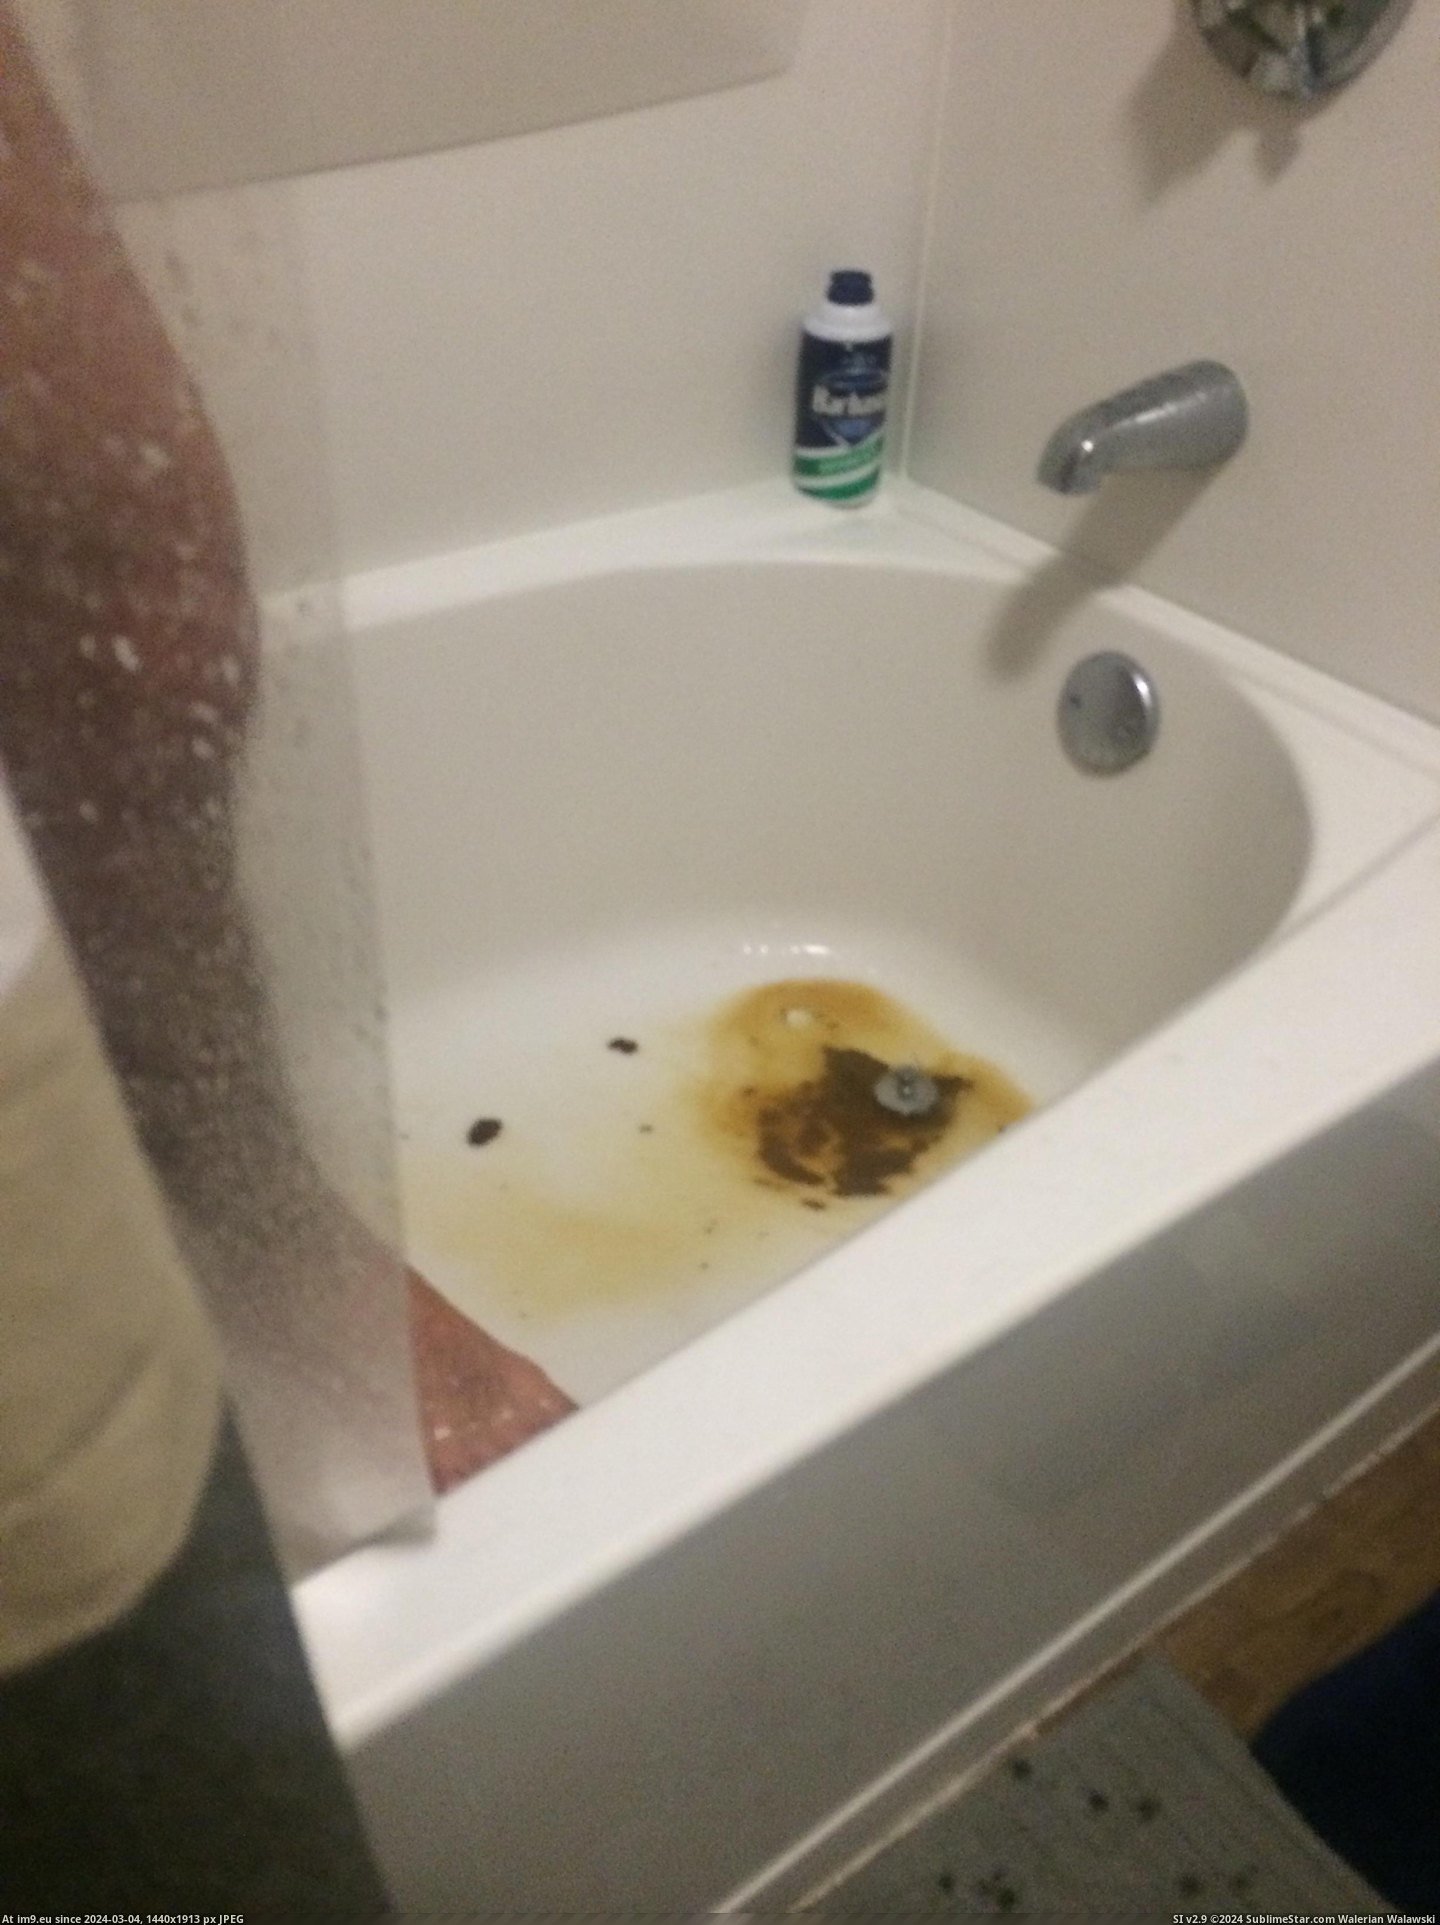 #Wtf #Shower #Shit #Sober #Roomate #Drain #Pushed #Purpose [Wtf] Roomate took a shit in the shower and pushed it down the drain. On purpose. Sober. Pic. (Bild von album My r/WTF favs))